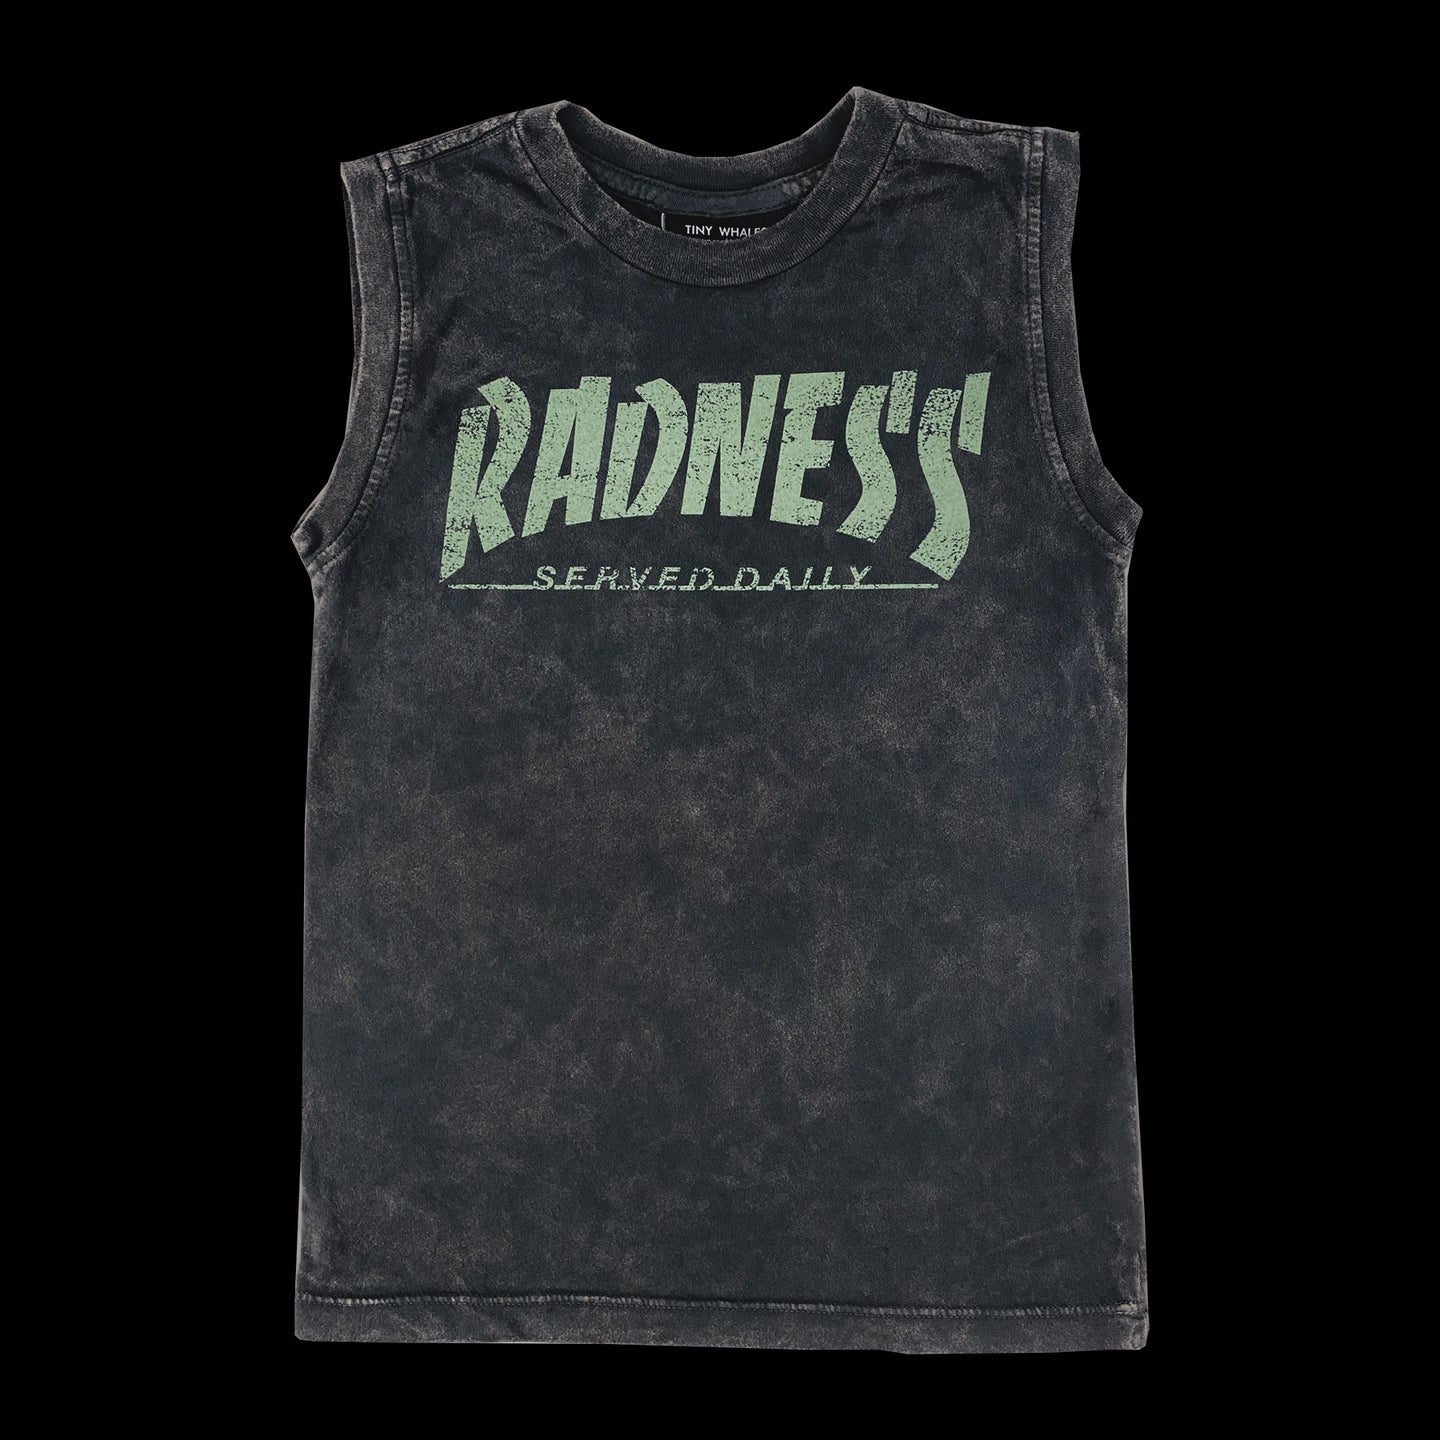 Tiny Whales - Radness Served Daily Muscle Tee - Mineral Black